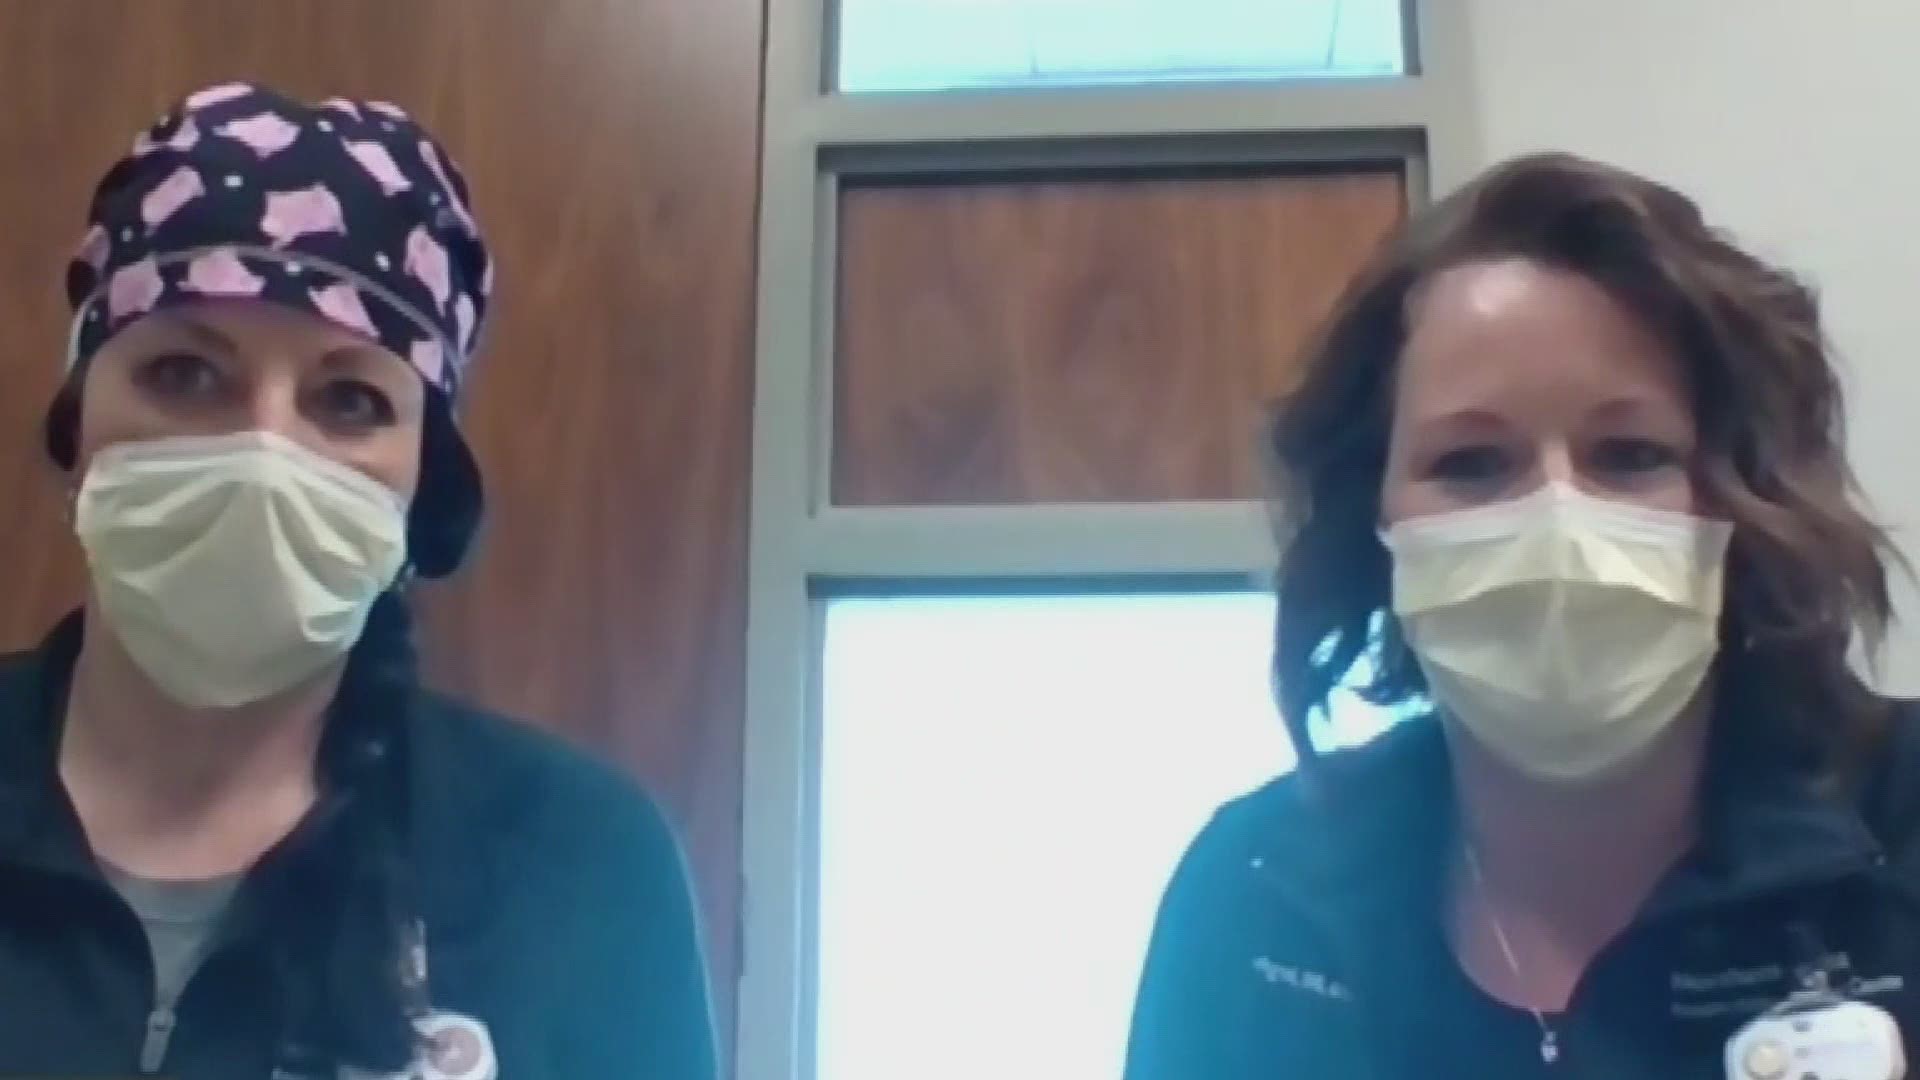 Nurses at Northern Light Cancer Care are dealing with physical and emotional changes during the coronavirus pandemic to better protect susceptible patients.